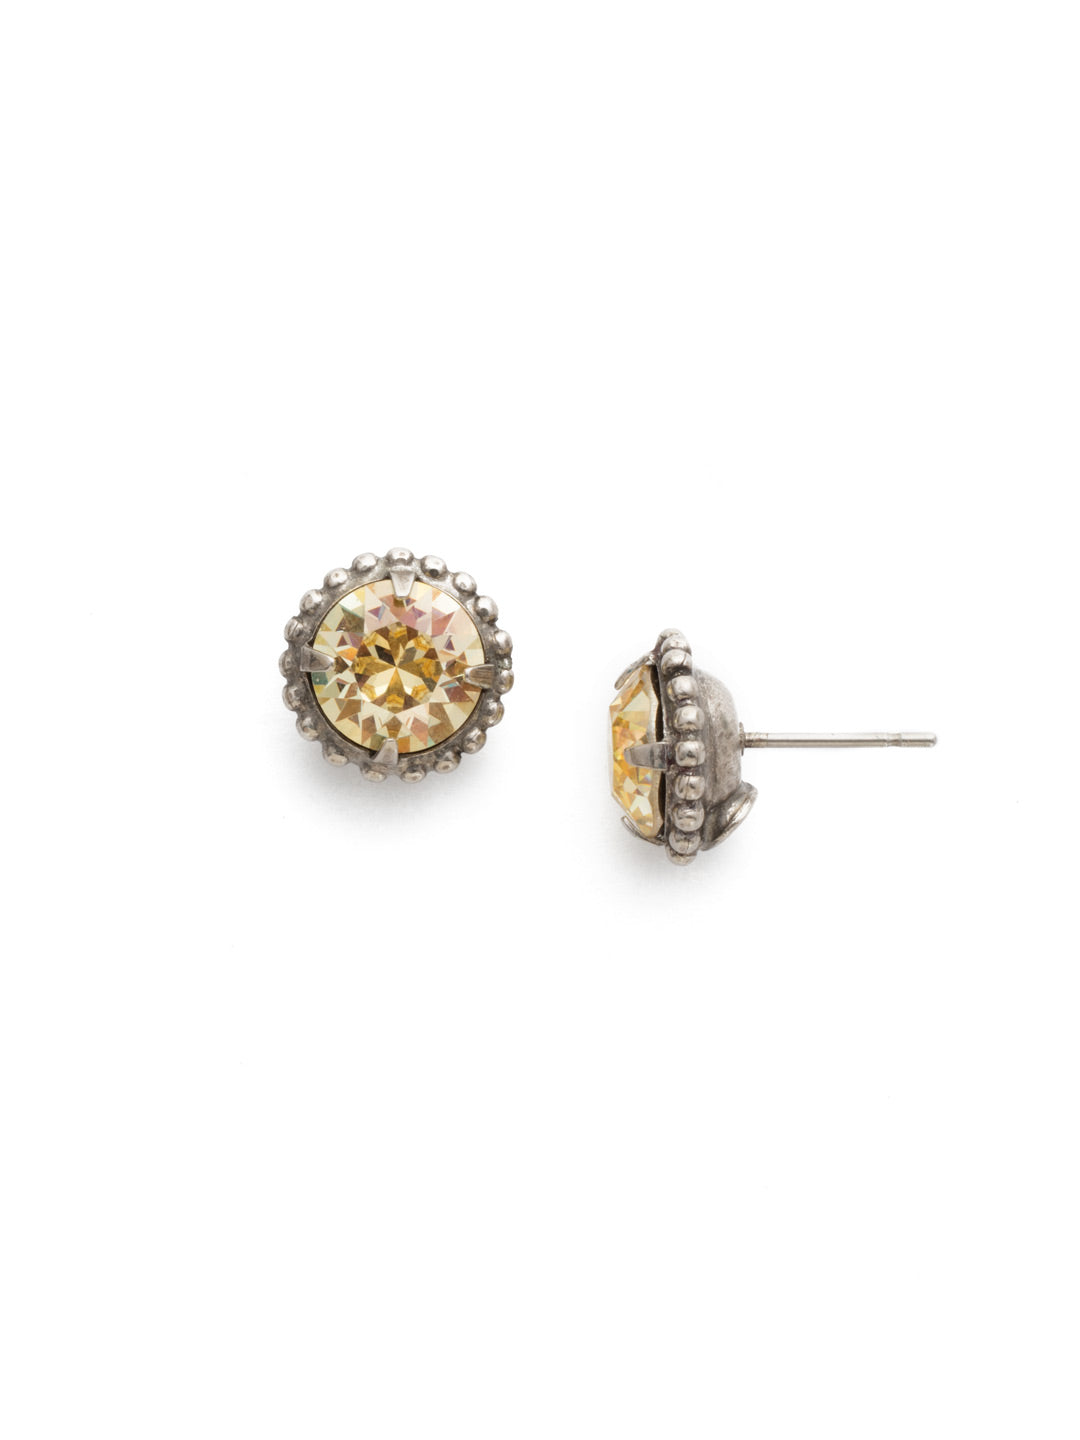 Simplicity Stud Earrings - EBY38ASCCH - <p>A timeless classic, the Simplicity Stud Earrings feature round cut crystals in a variety of colors; accented with a halo of metal beaded detail. Need help picking a stud? <a href="https://www.sorrelli.com/blogs/sisterhood/round-stud-earrings-101-a-rundown-of-sizes-styles-and-sparkle">Check out our size guide!</a> From Sorrelli's Crystal Champagne collection in our Antique Silver-tone finish.</p>